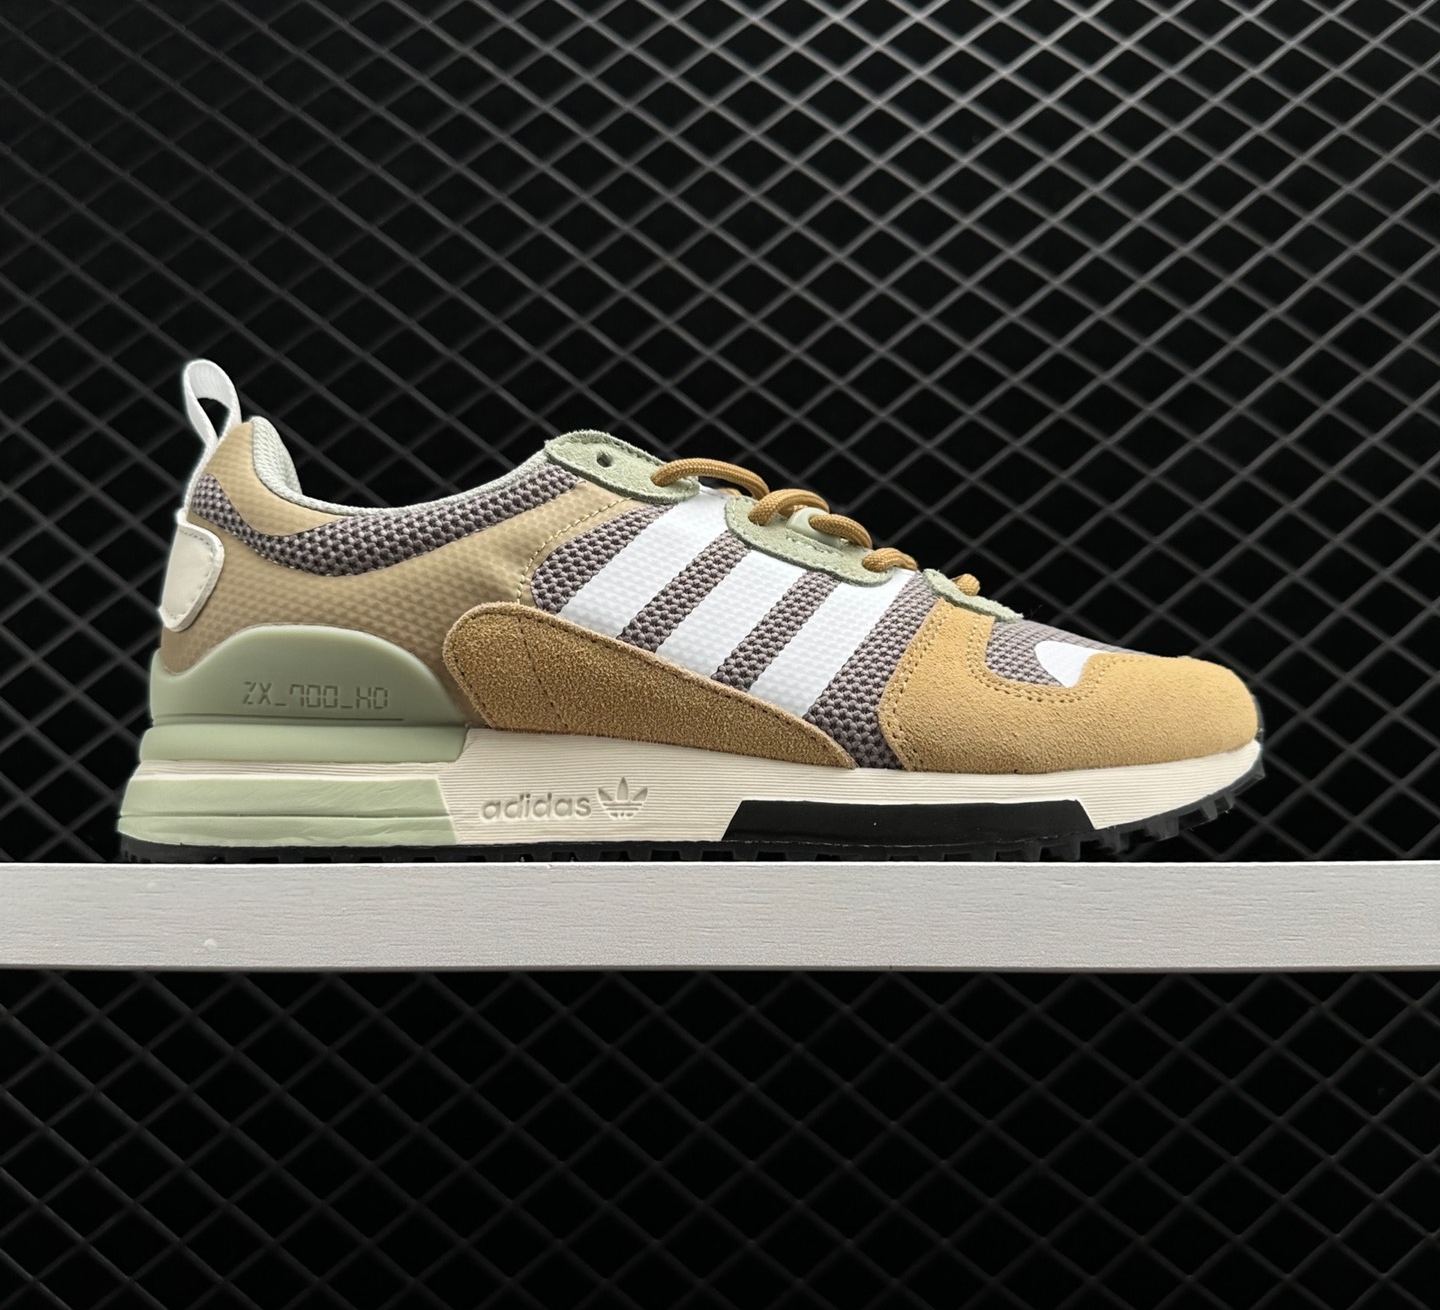 Adidas Originals ZX 700 HD Shoes - Beige/Off White/Feather Grey | H01849